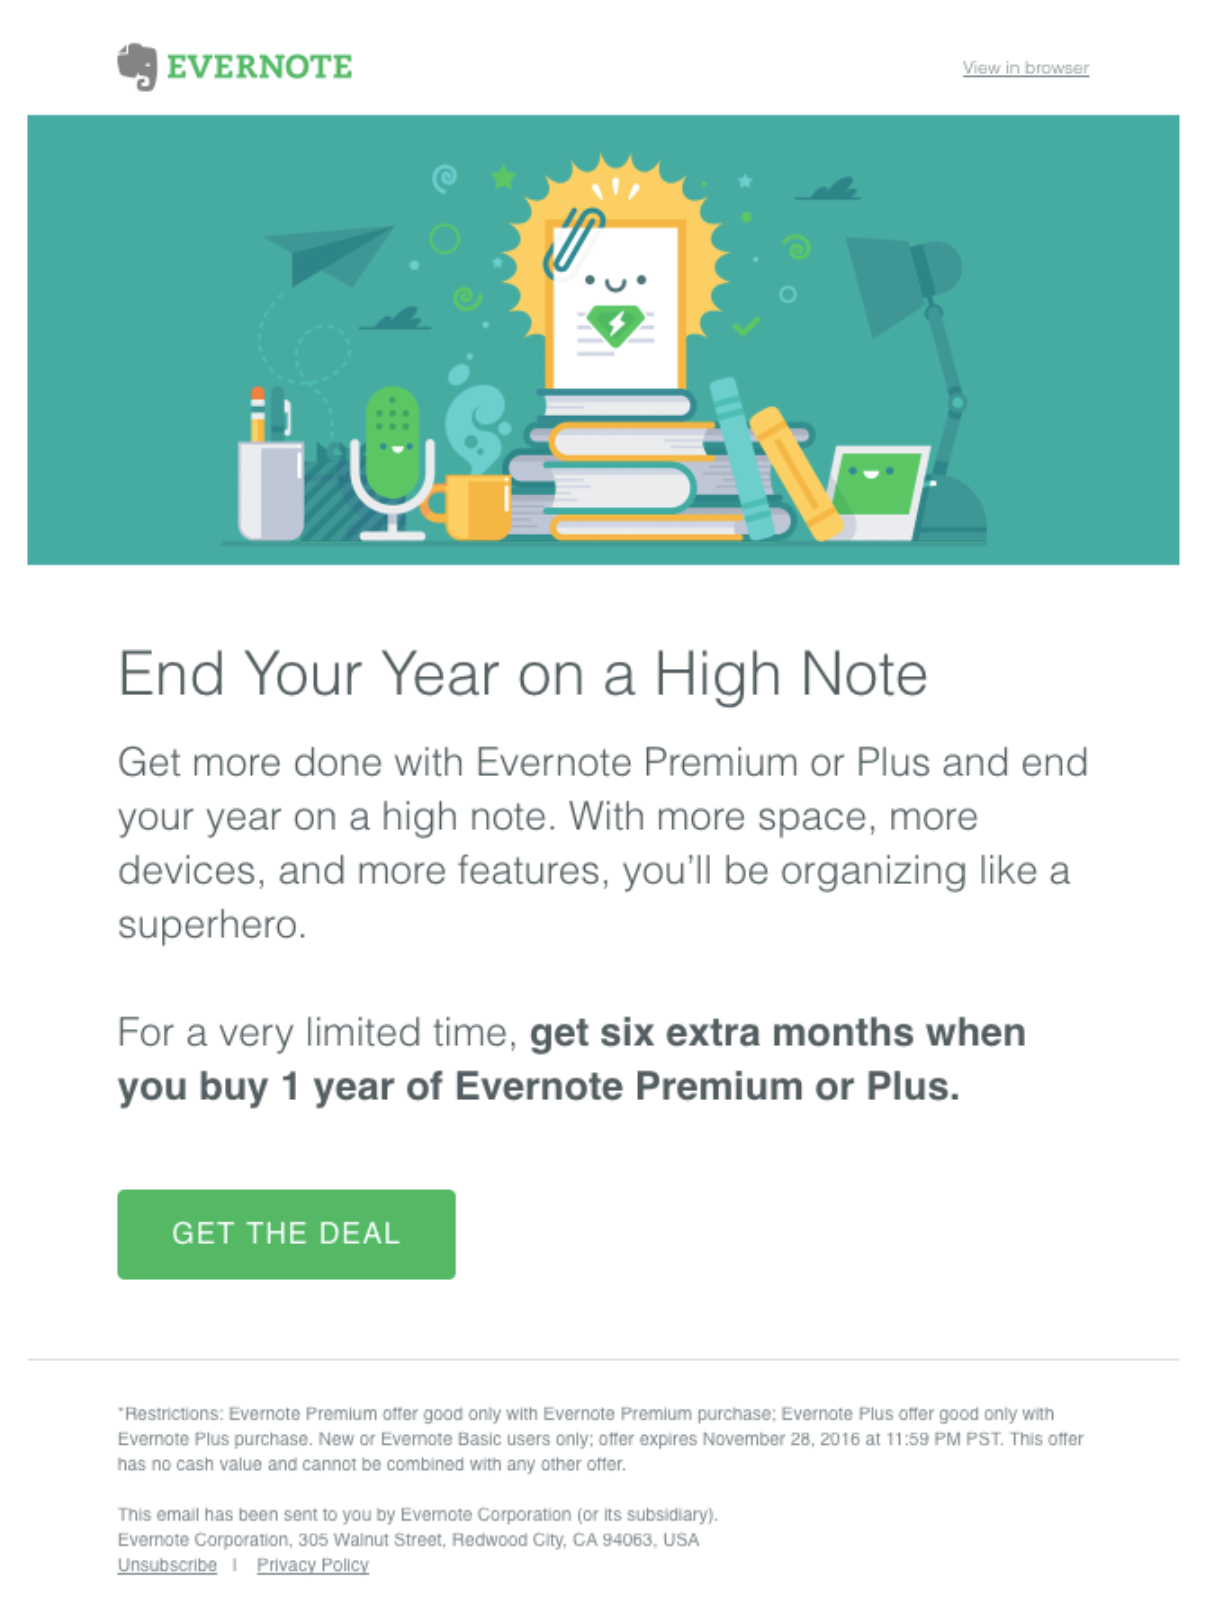 Evernote upsell email example